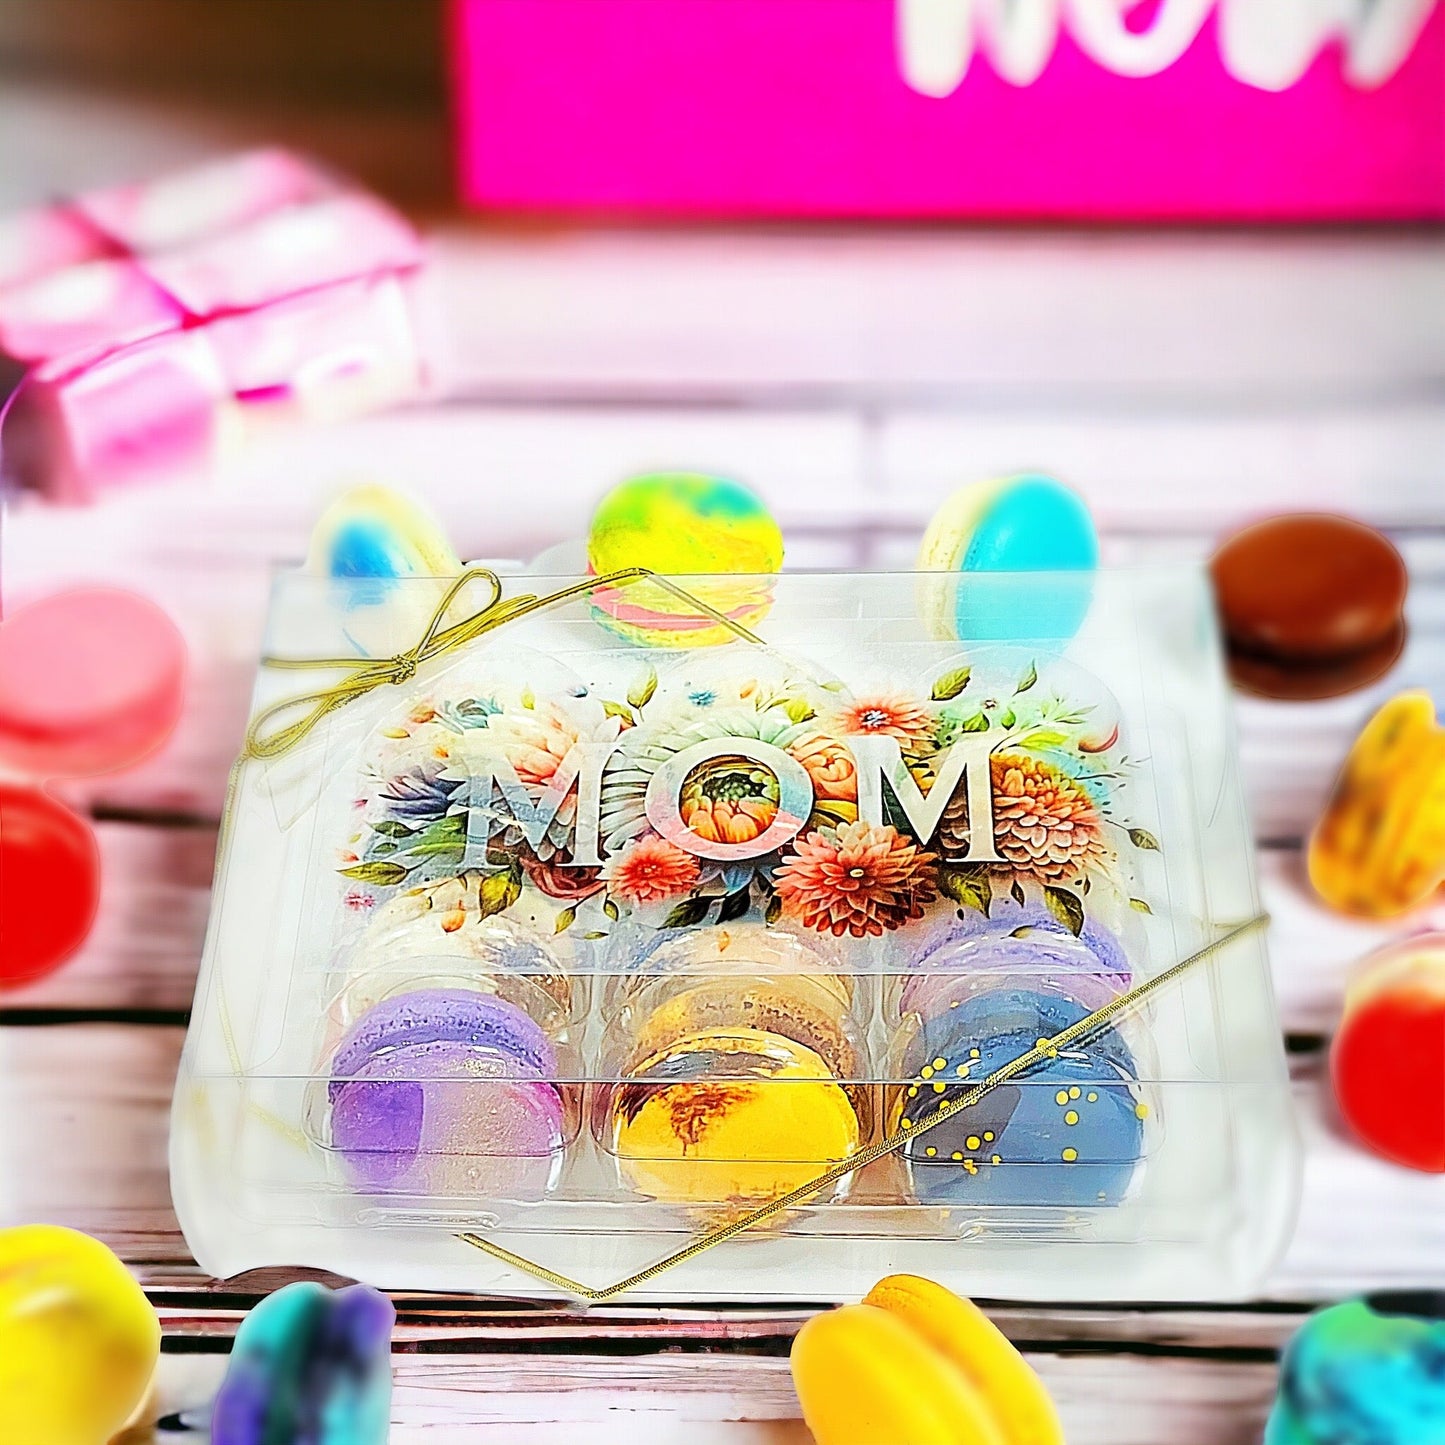 MOM | 12 Pack Assortment French Macarons | Each macaron is labeled with its flavor for easy identification - Macaron Centrale